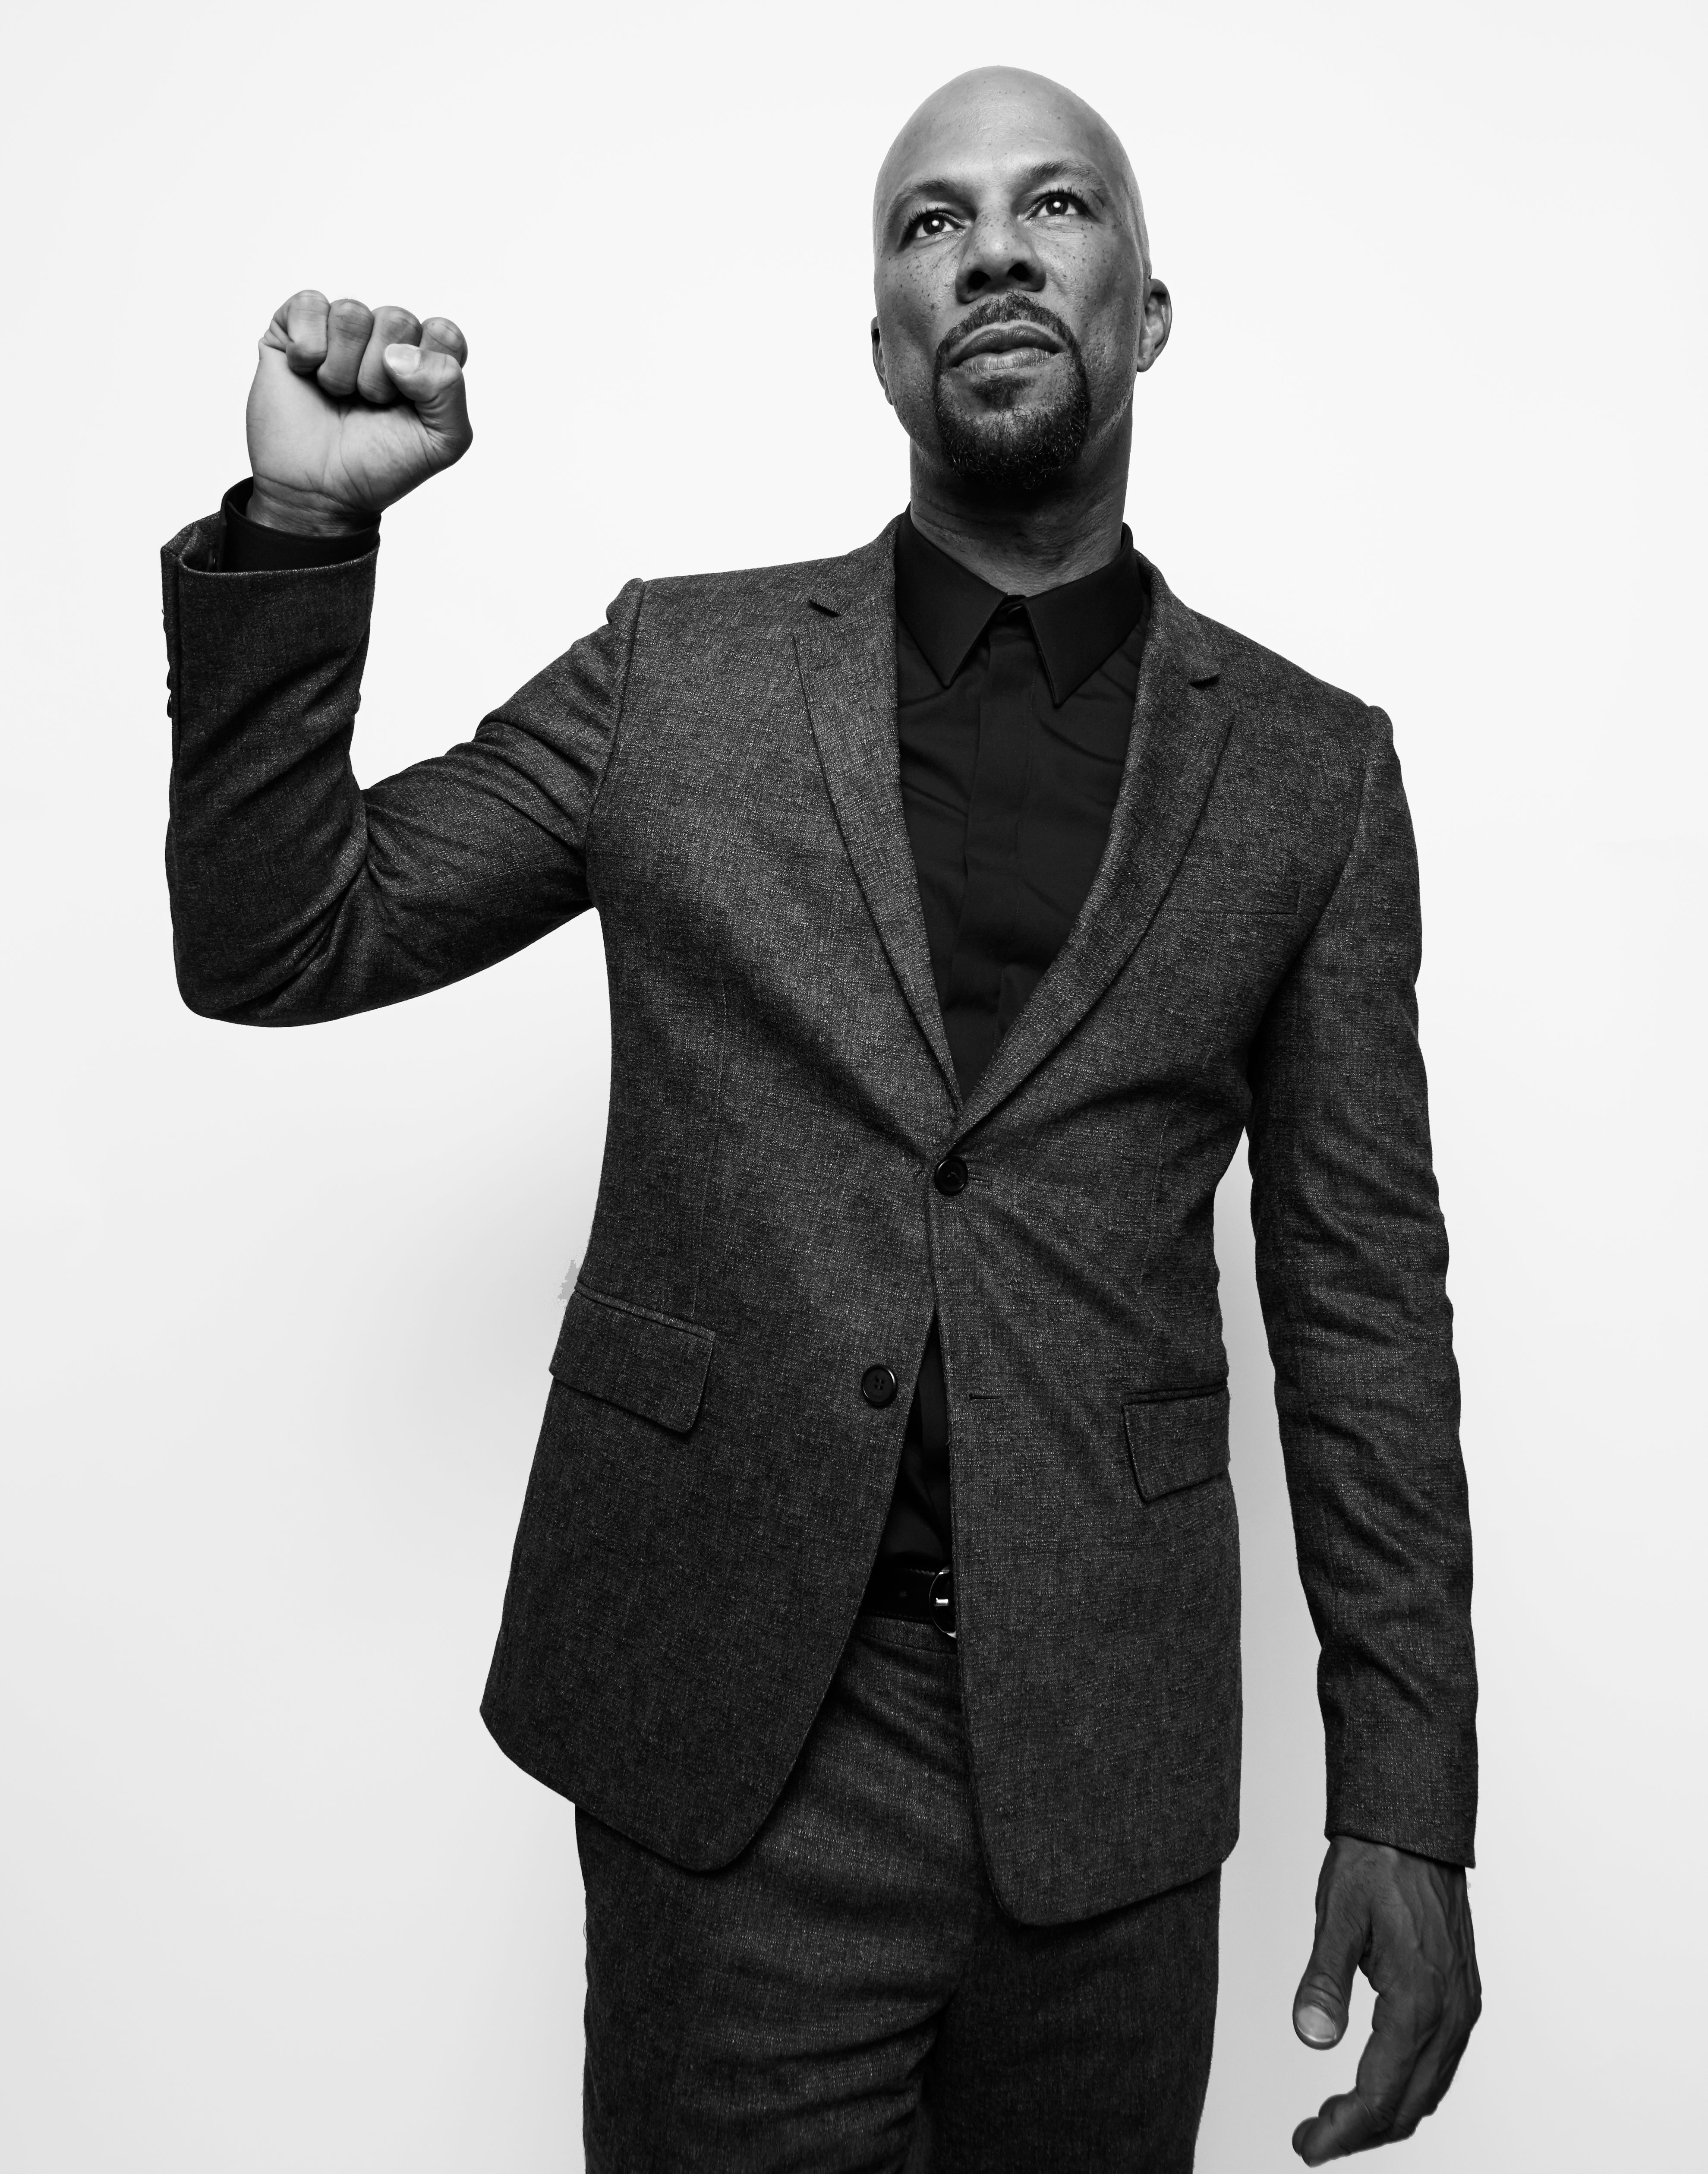 Common's Not Relying On Trump And The Government To Help Chicago
